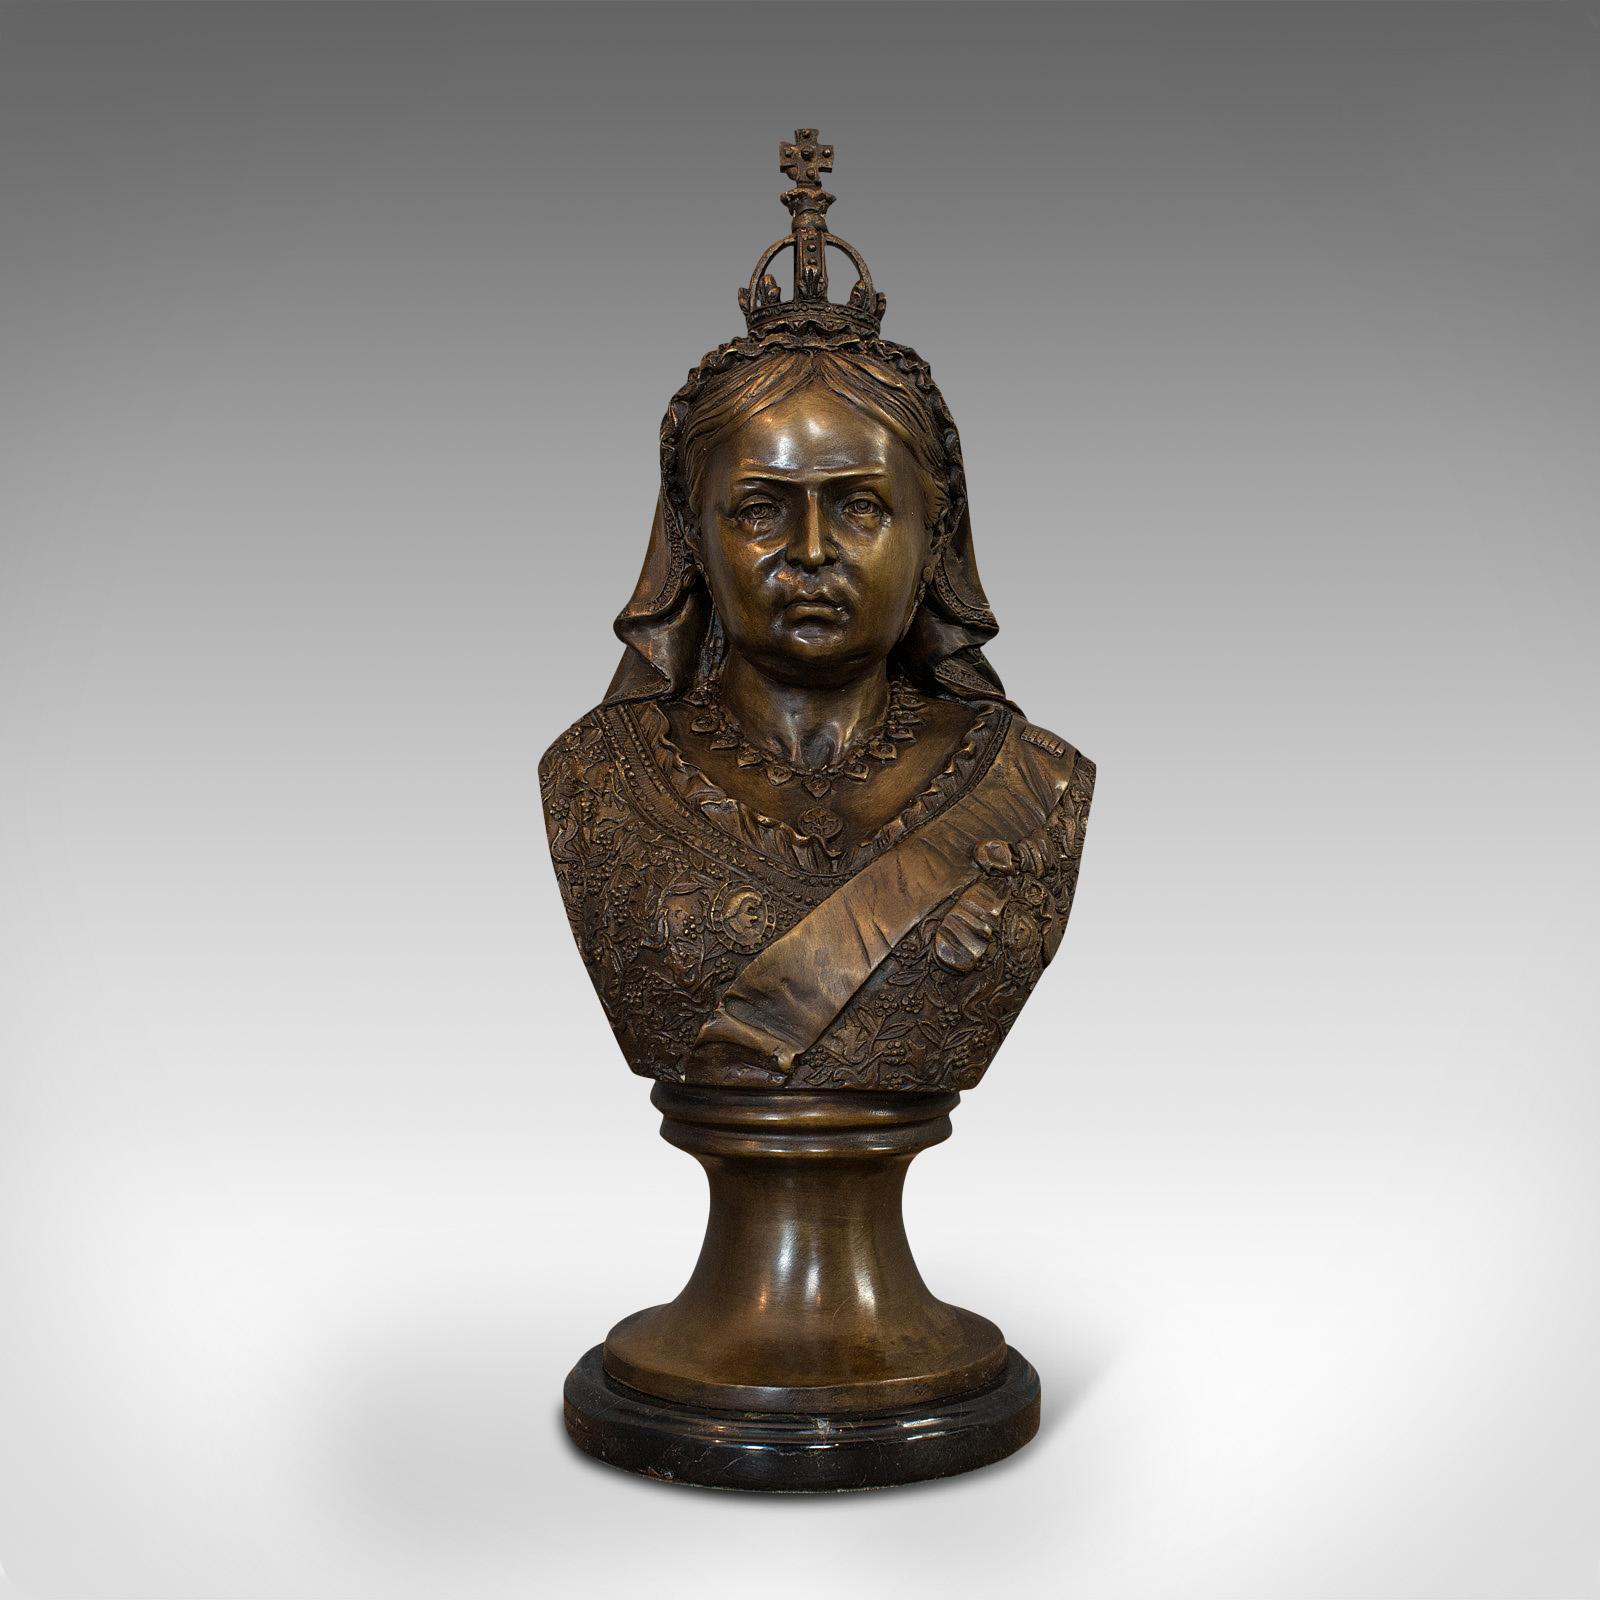 This is a vintage bust of Queen Victoria. An English, bronze, decorative Royal portrait of the long-serving monarch and Empress of India, dating to the 20th century.

An enduring icon of the British monarchy
Displays a desirable aged